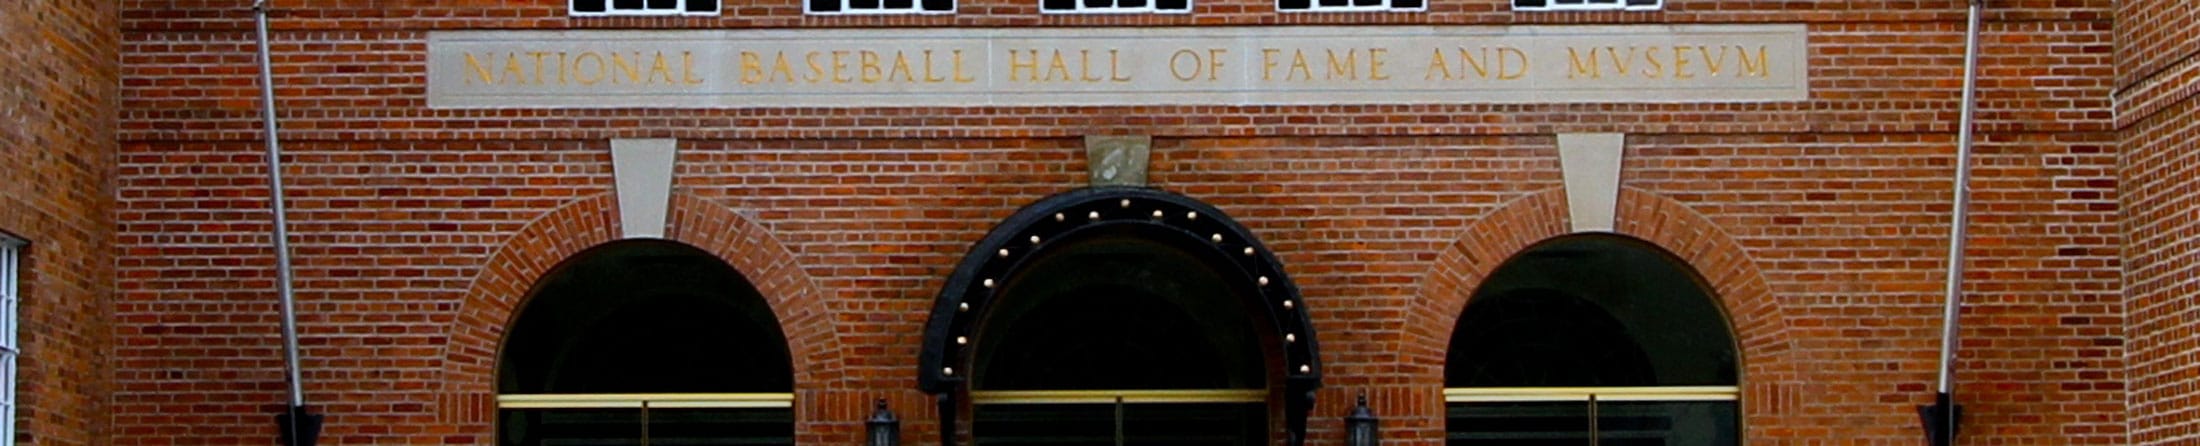 National Baseball Hall of Fame and Museum - Two down – five more